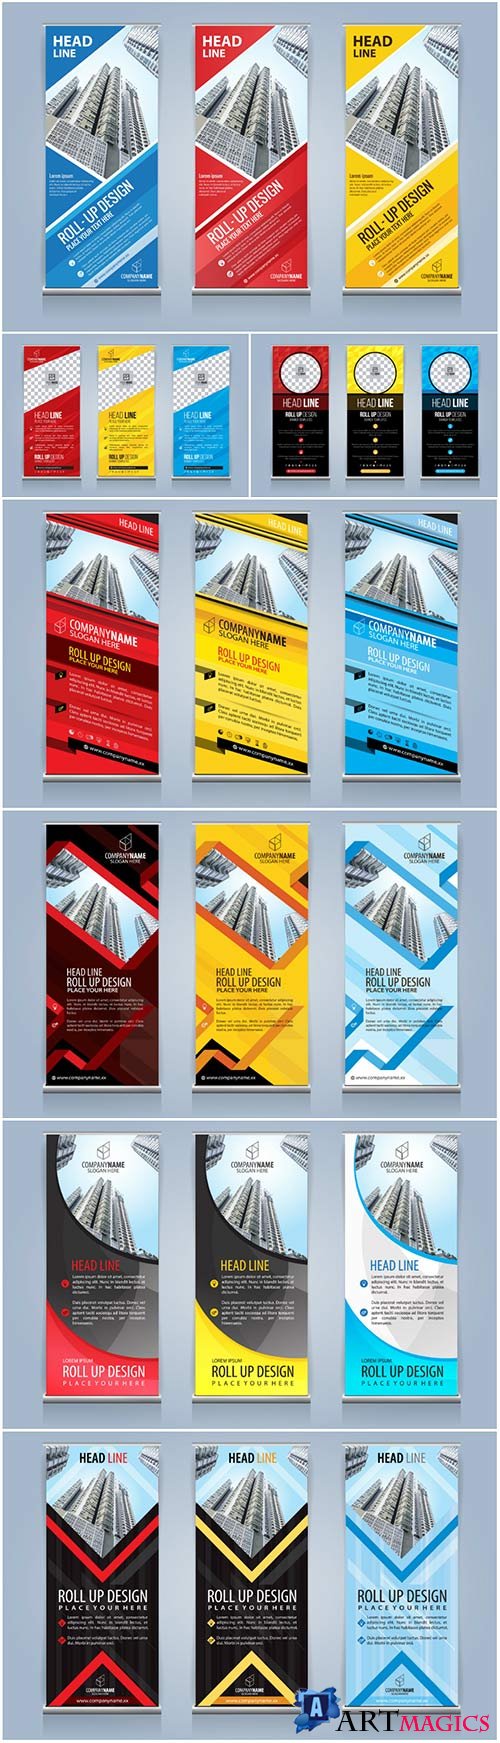 Roll up banners for web and advertisement print out, vector flyer handout design # 4